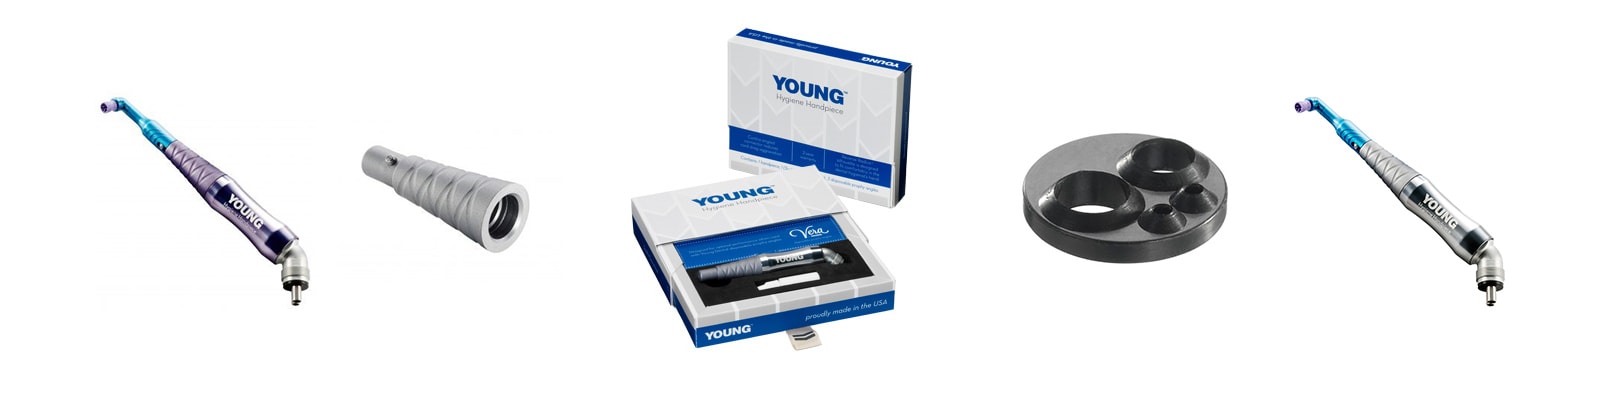 Young™ Corded Hygiene Handpiece